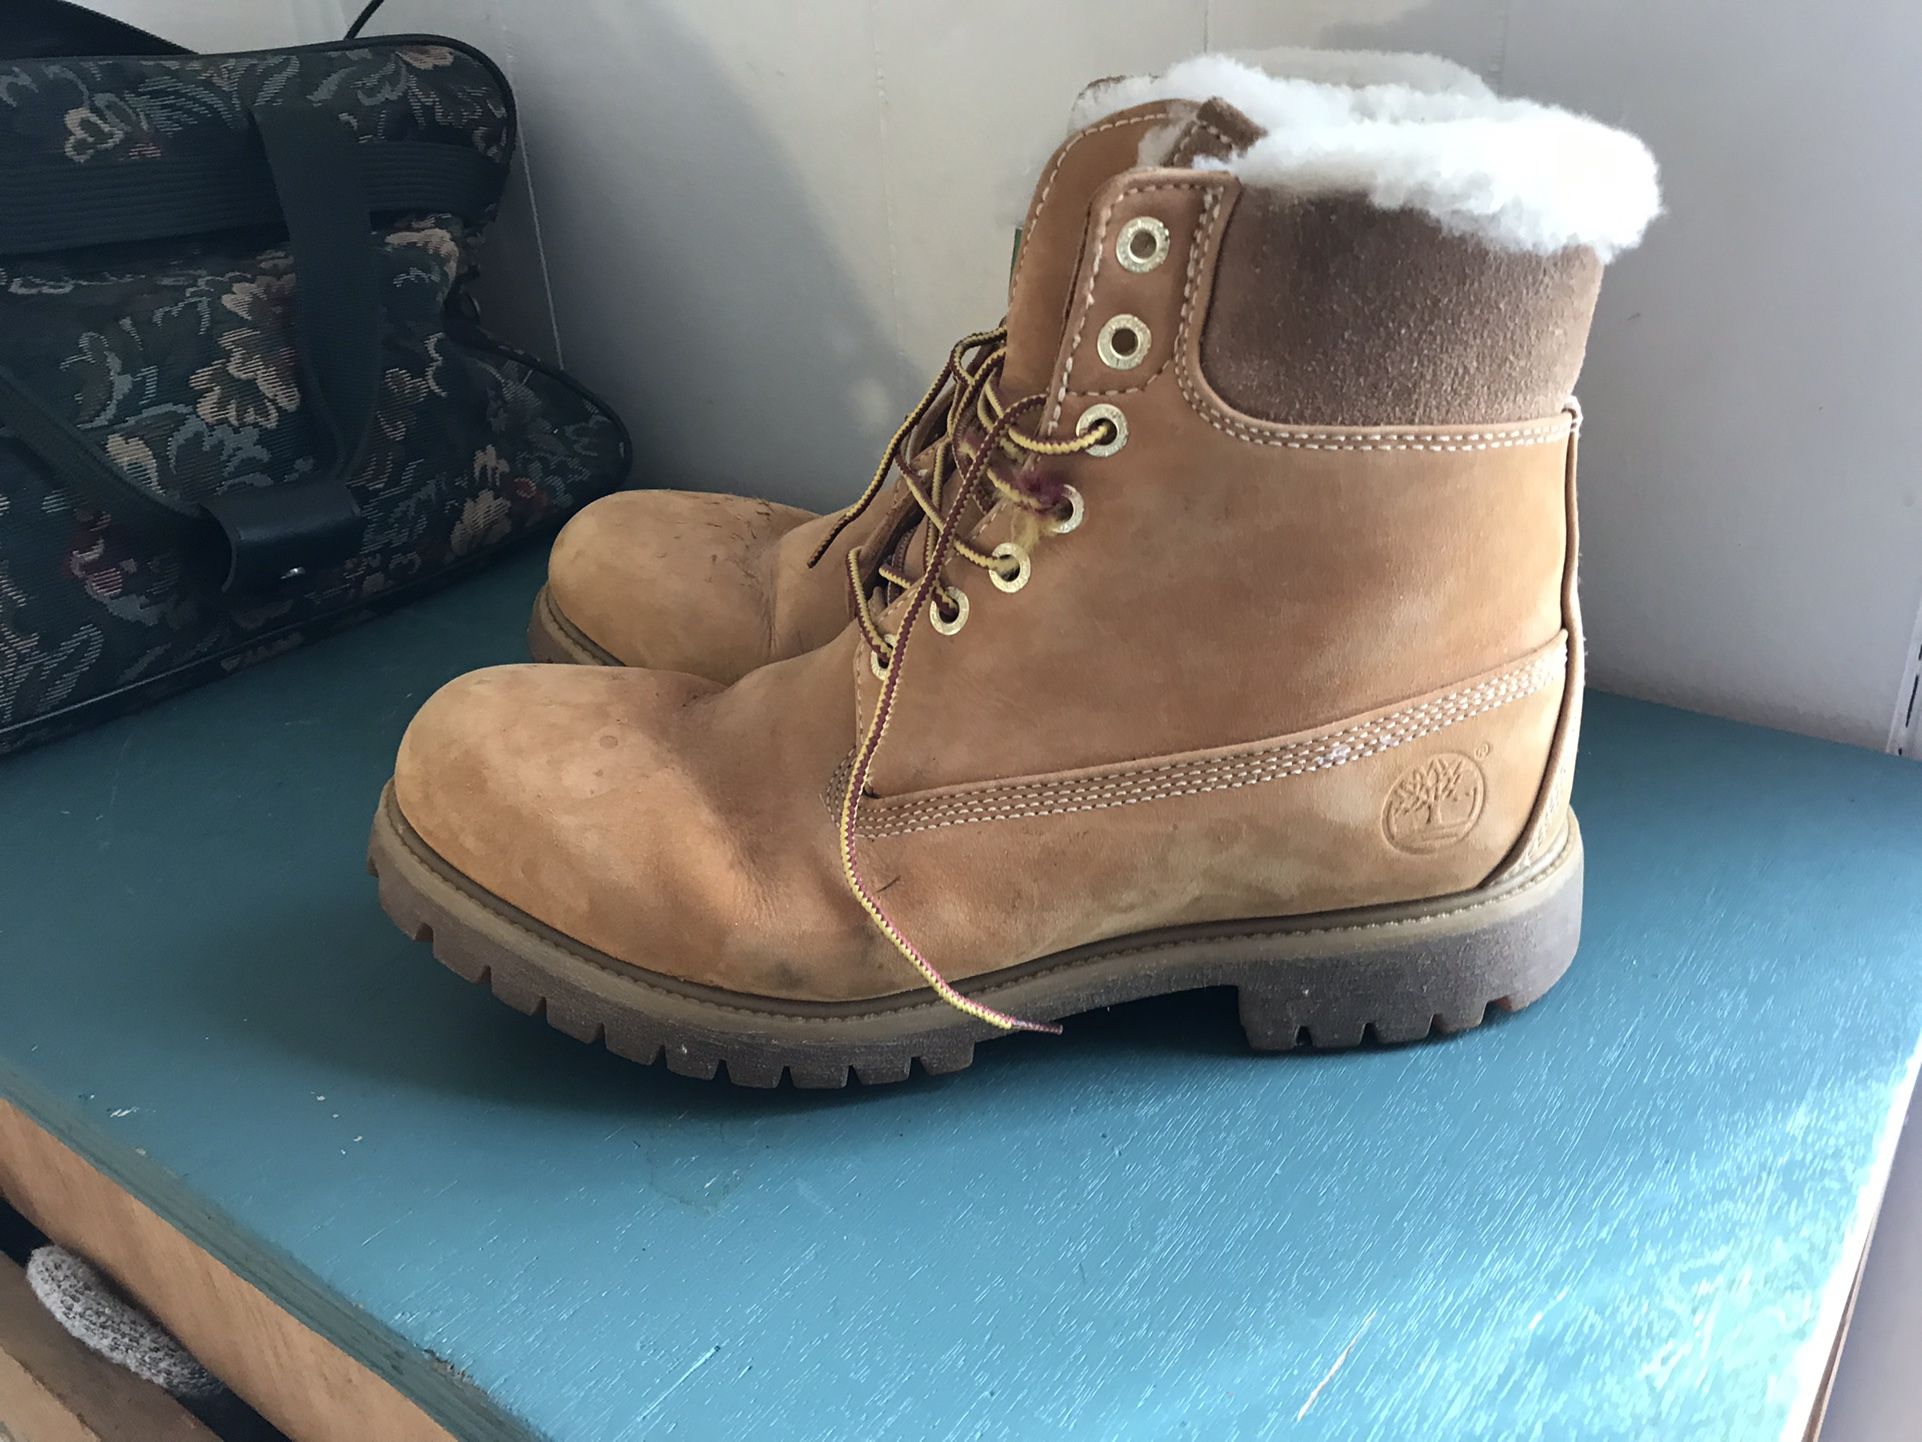 Timberland  Warm Work Boots  Never Worn But A Few Imperfection’s  On Leather  Mens Size 9  1/2 Wide  Asking $60  OBO